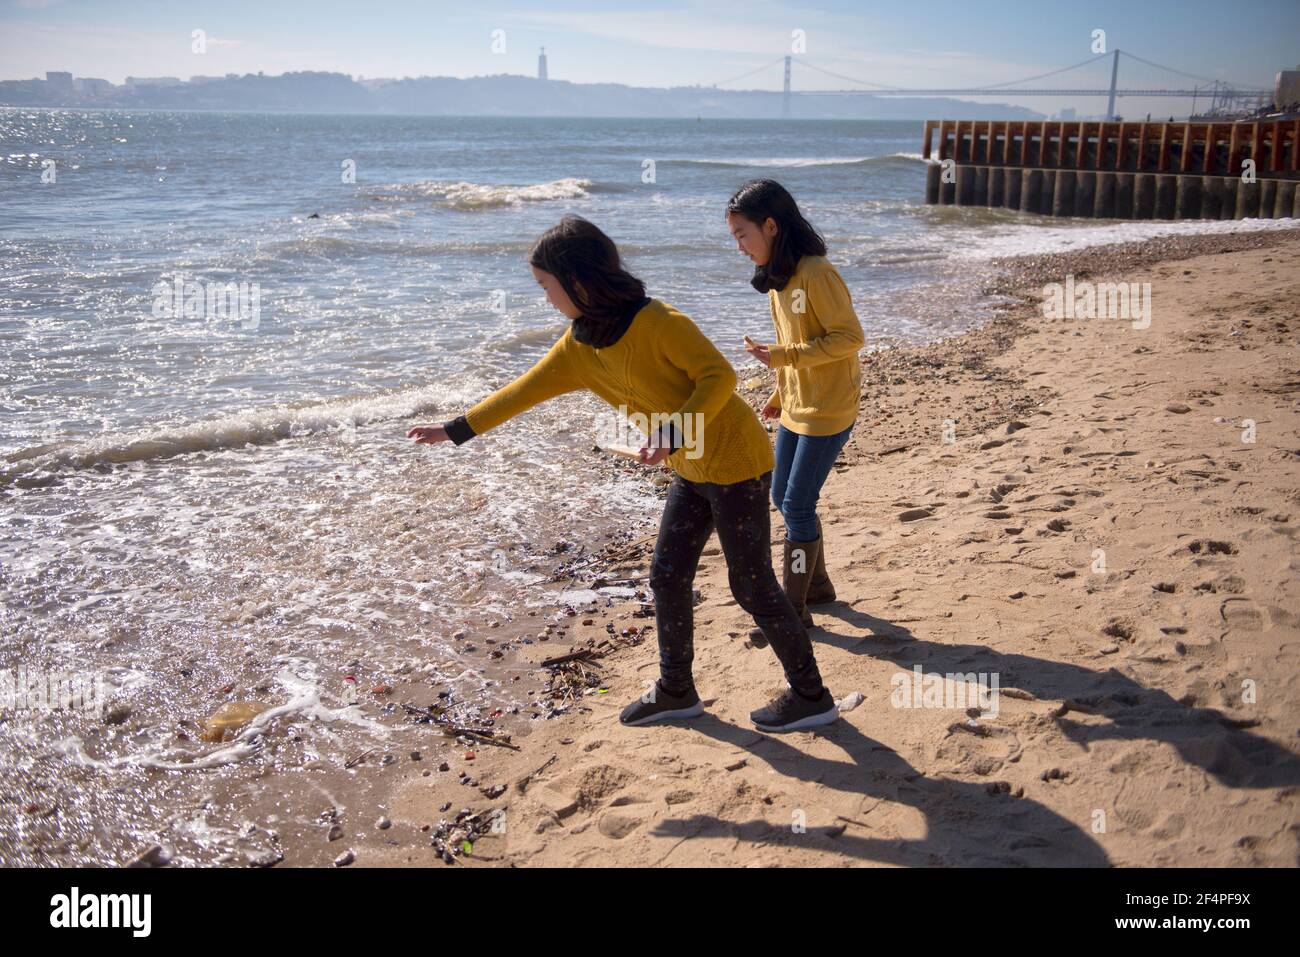 Two girls on the banks of the Teju River Throw stones into the river. Stock Photo